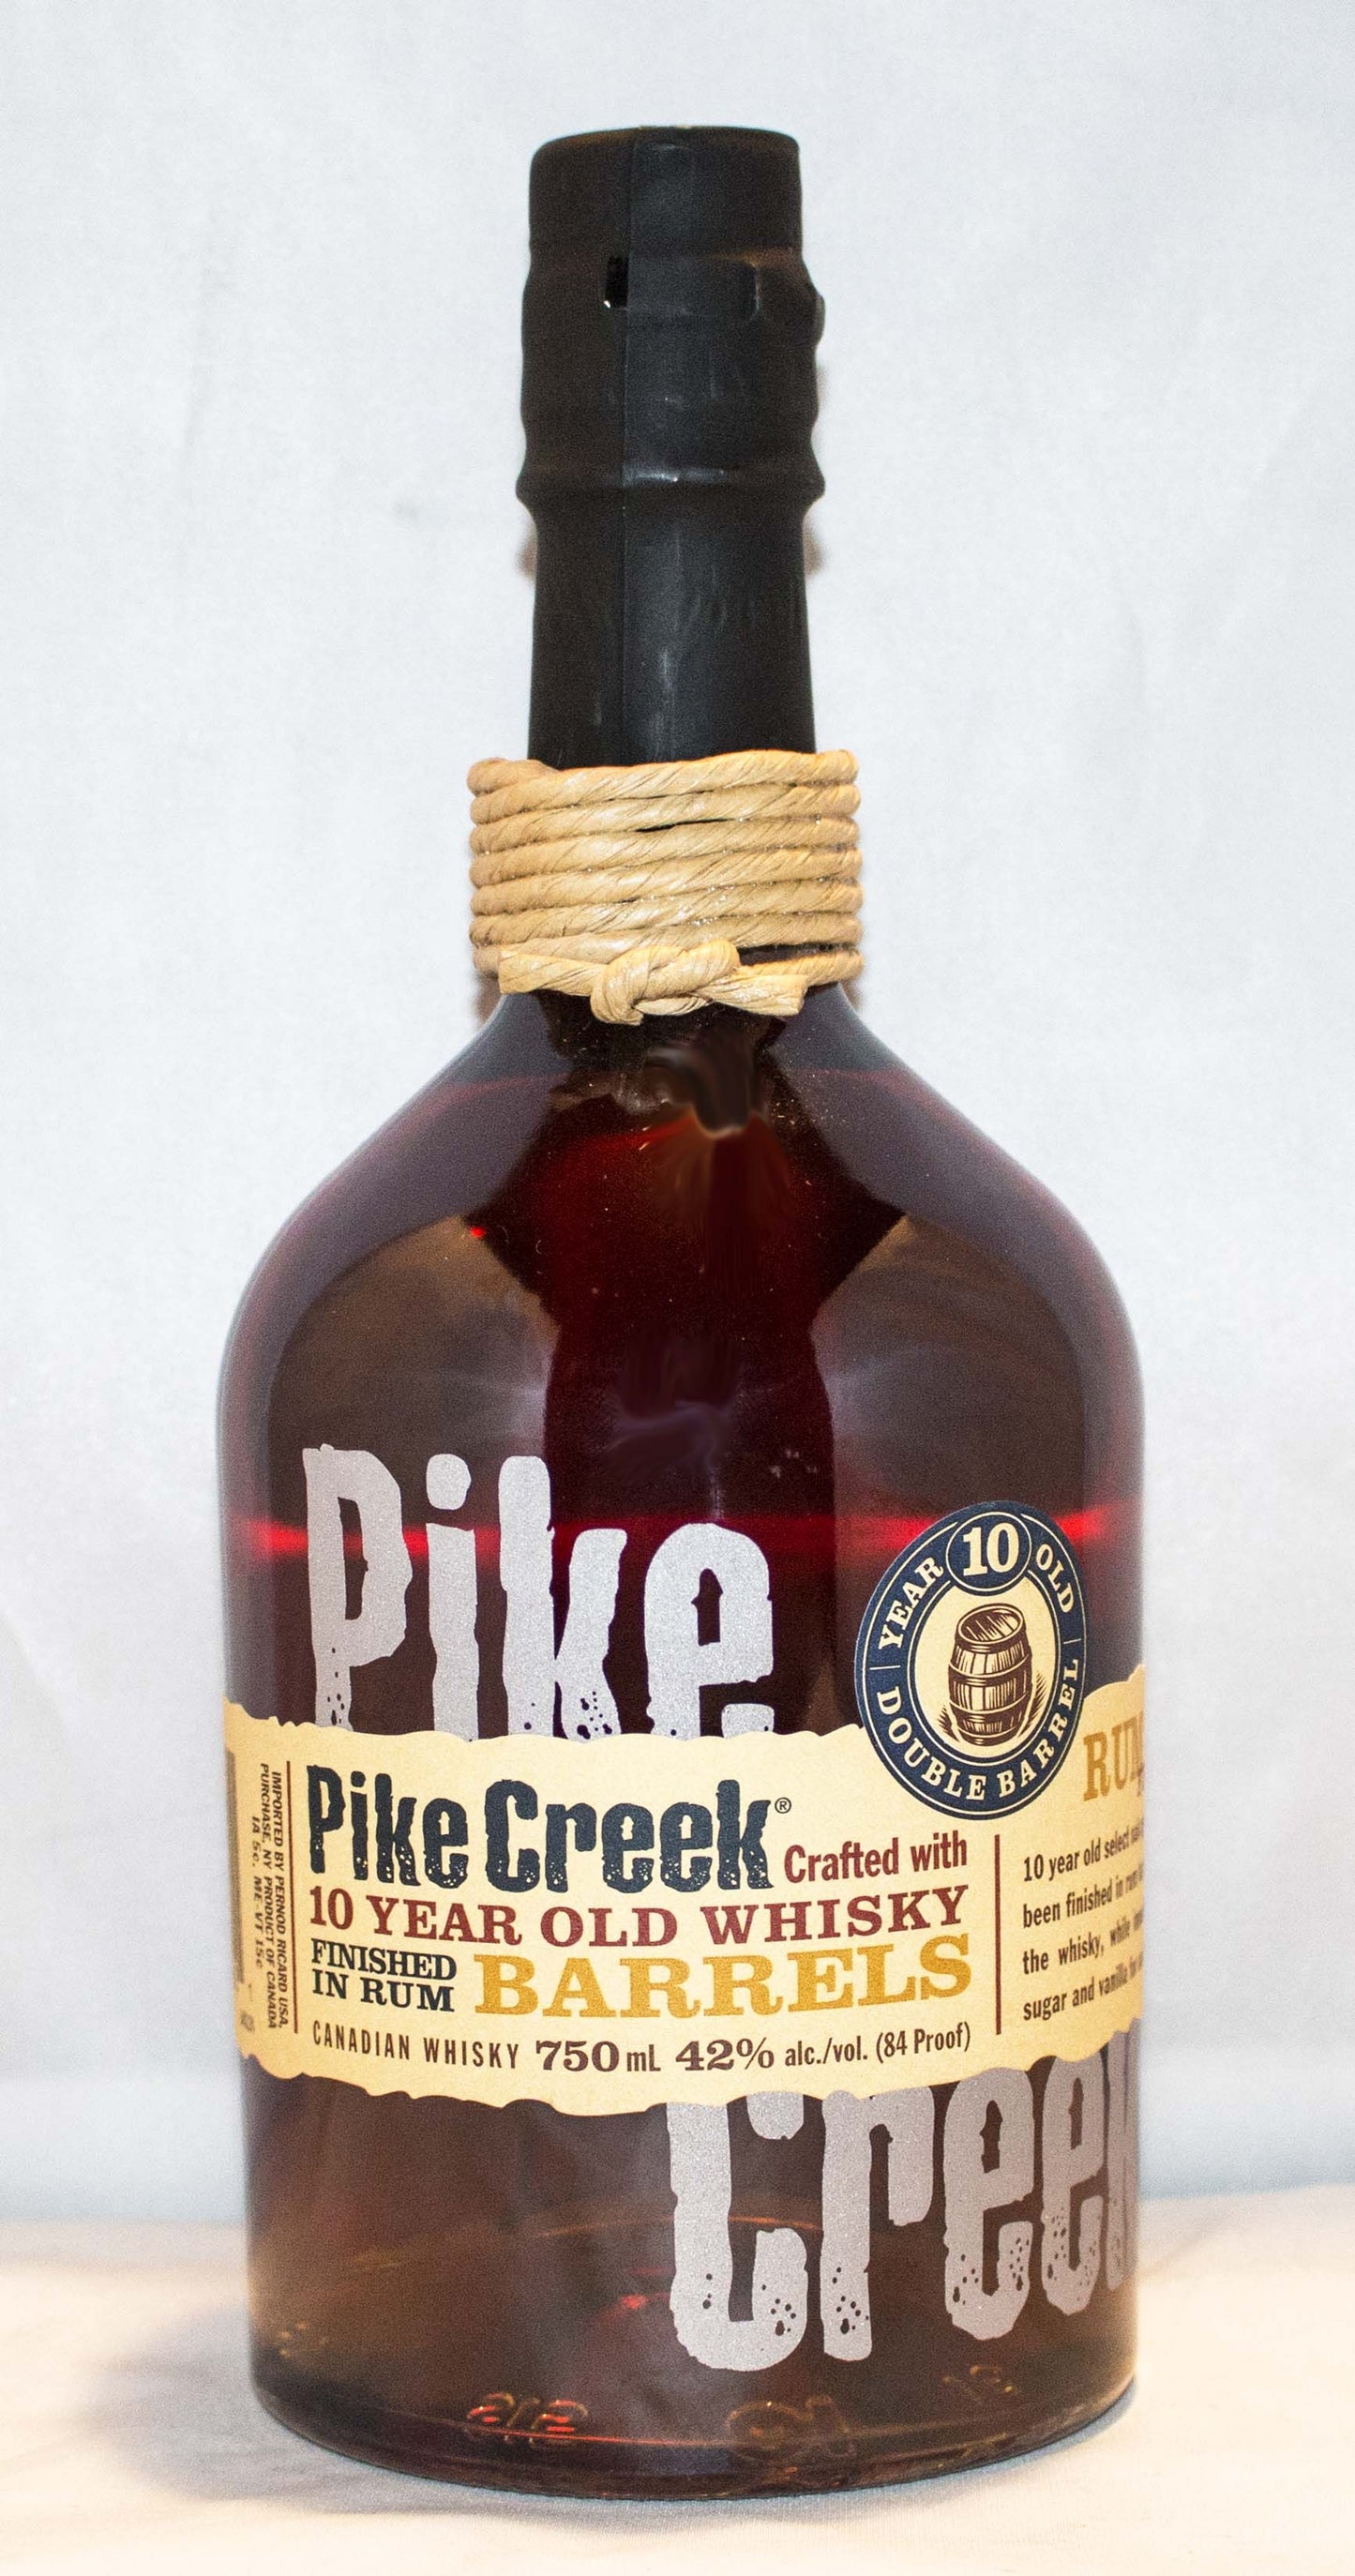 PIKE CREEK WHISKY CANADIAN FINISHED IN RUM BARREL 10YR 84PF 750ML - Remedy Liquor